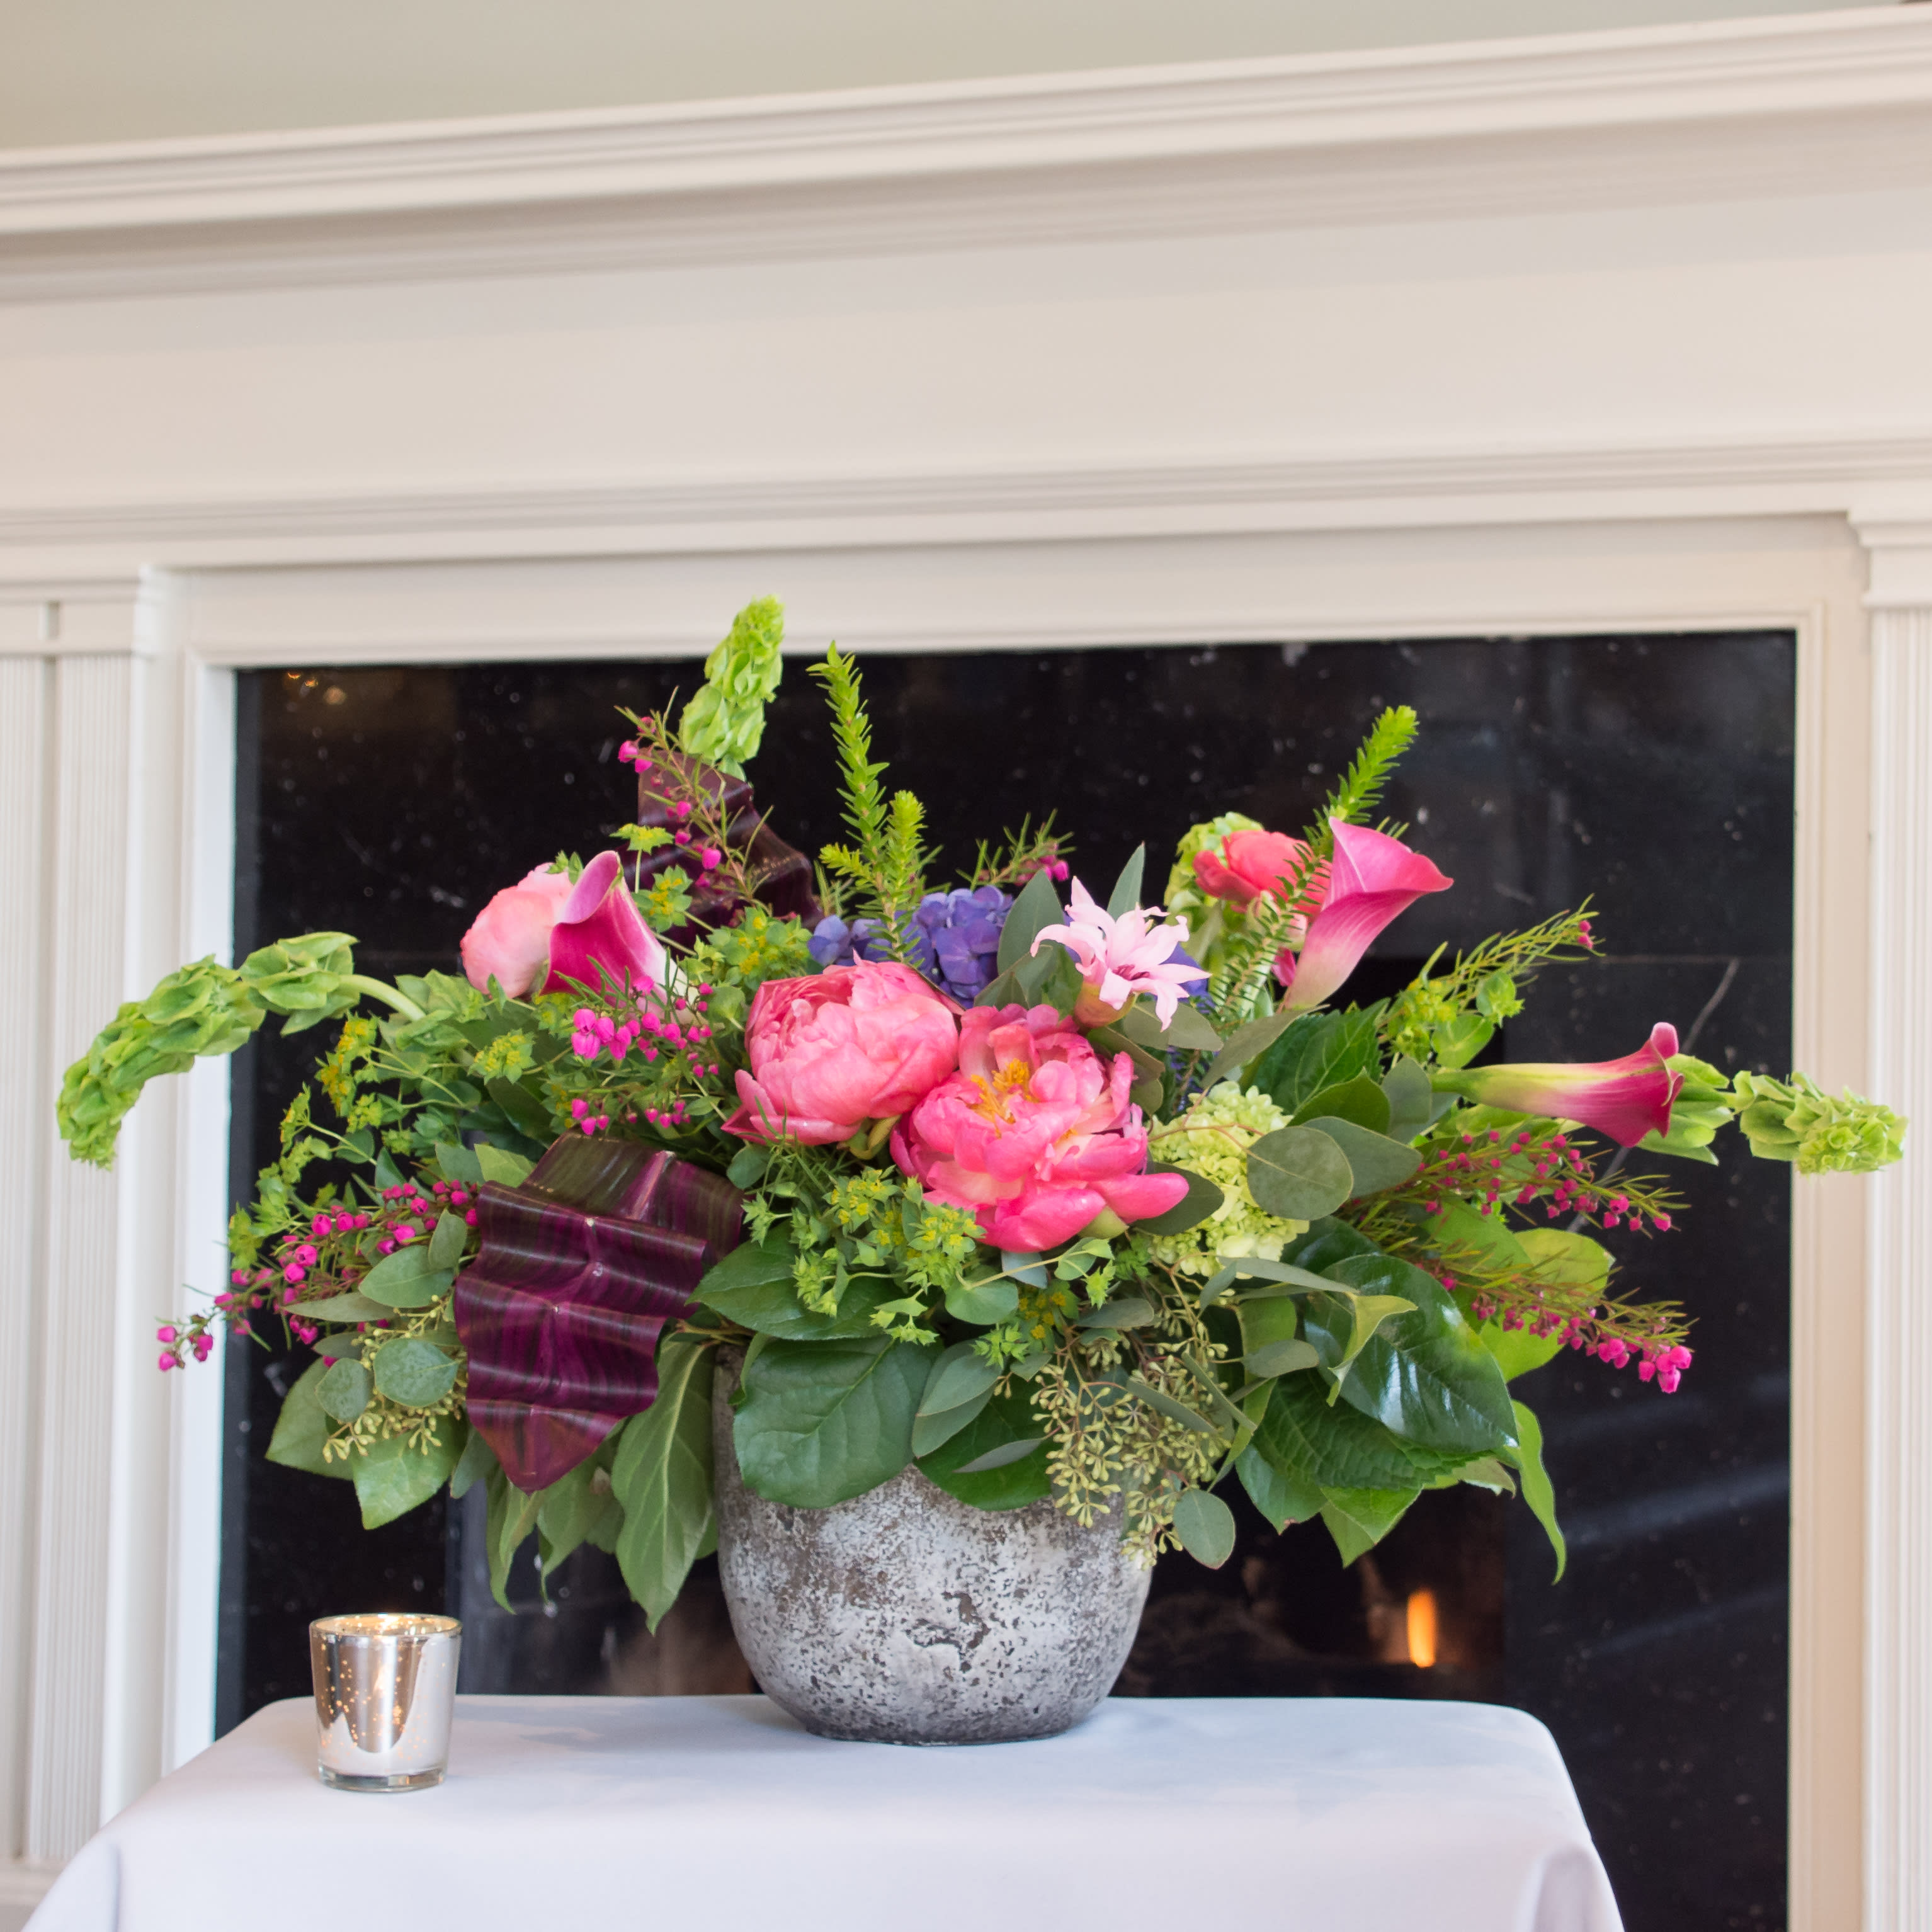 Shelldons Delight - An amazing assortment of beautiful blooms emcompassed in pinks, purples and lush foliage. Designed in a beautiful concrete style container